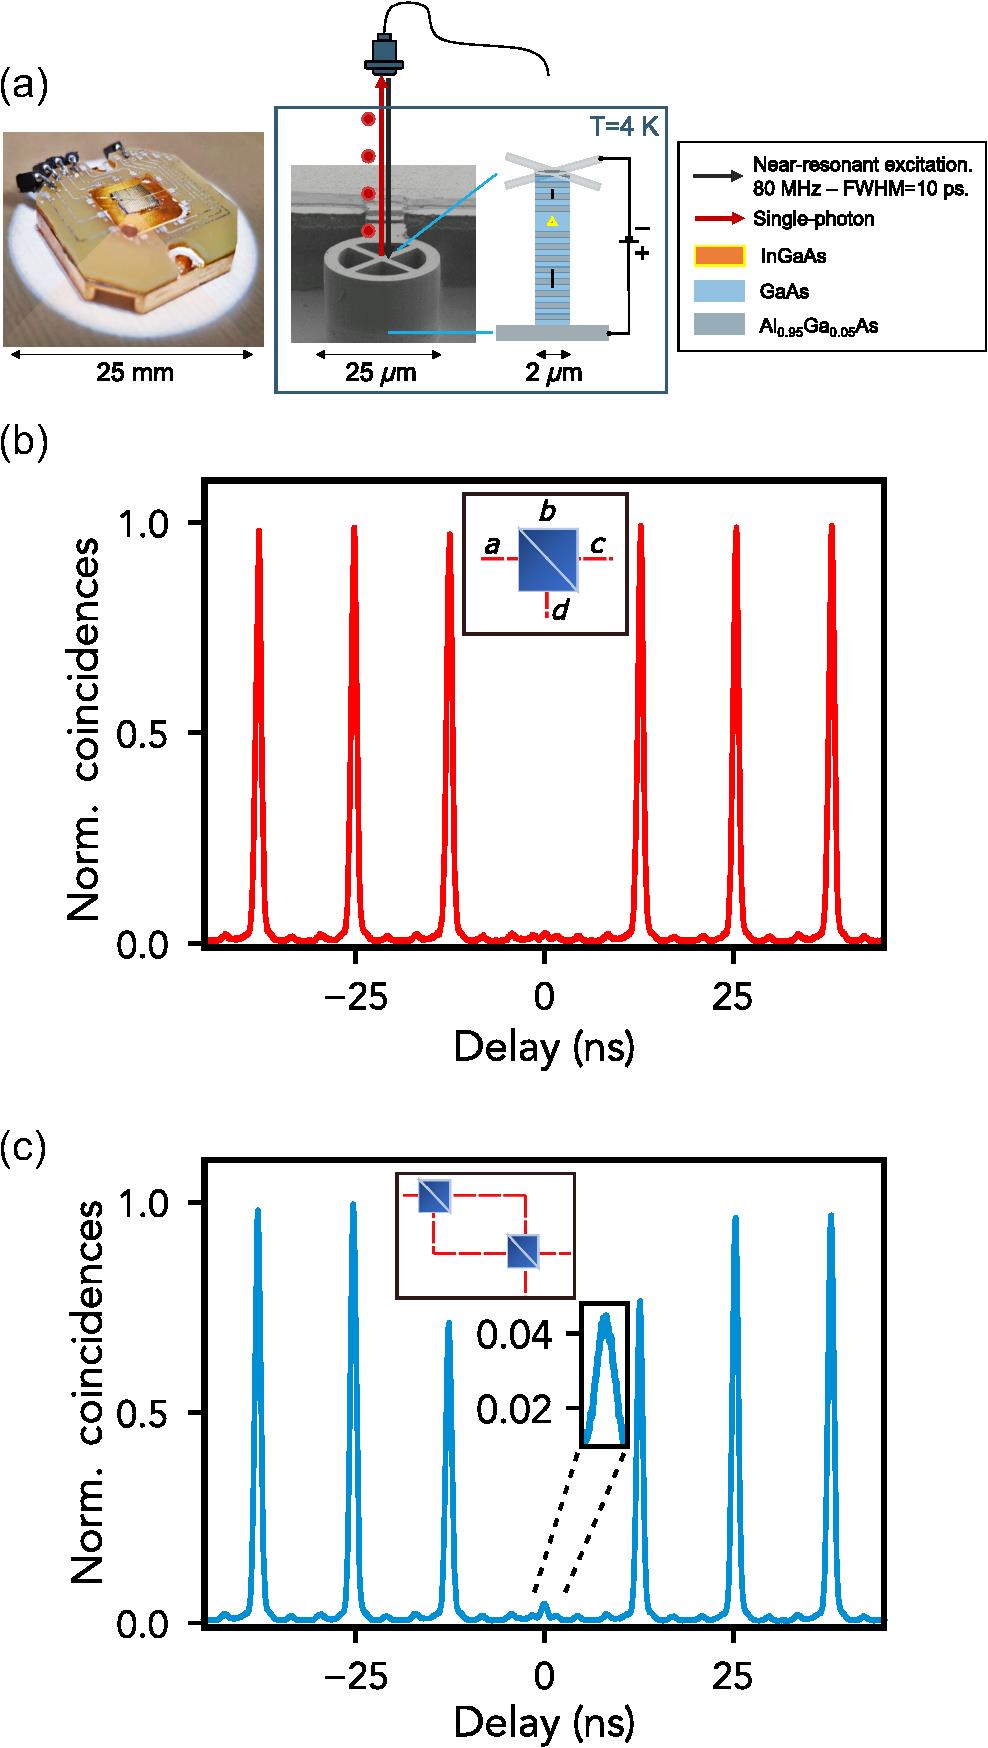 Source HOM interference and second-order correlation function. (a) (Left) The single-photon source is a commercial device (Quandela): InGaAs quantum-dot based bright emitters are embedded in (right) electrically contacted micropillars. The source is pumped with a near-resonant (Δλ=−0.6 nm) FWHM 10 ps 79 MHz-pulsed laser (red arrow). The single photons (red dots) are emitted at a wavelength of 927.8 nm and are directly coupled to an SMF. (b) Through a standard Hanbury Brown and Twiss setup, we measure the second-order autocorrelation histogram of our QD-based source as a function of the delay. We obtain a single-photon purity of g(2)(0)=(1.26±0.05)%. (c) Normalized correlation histogram, obtained via an HOM interference experiment, through which we measure a two-photon interference fringe visibility between subsequent single photons emitted by the QD source of VHOM=(93.05±0.06)%. Moreover, following Ref. 84, we obtain an indistinguishability value of Ms=(95.5±0.1)%.